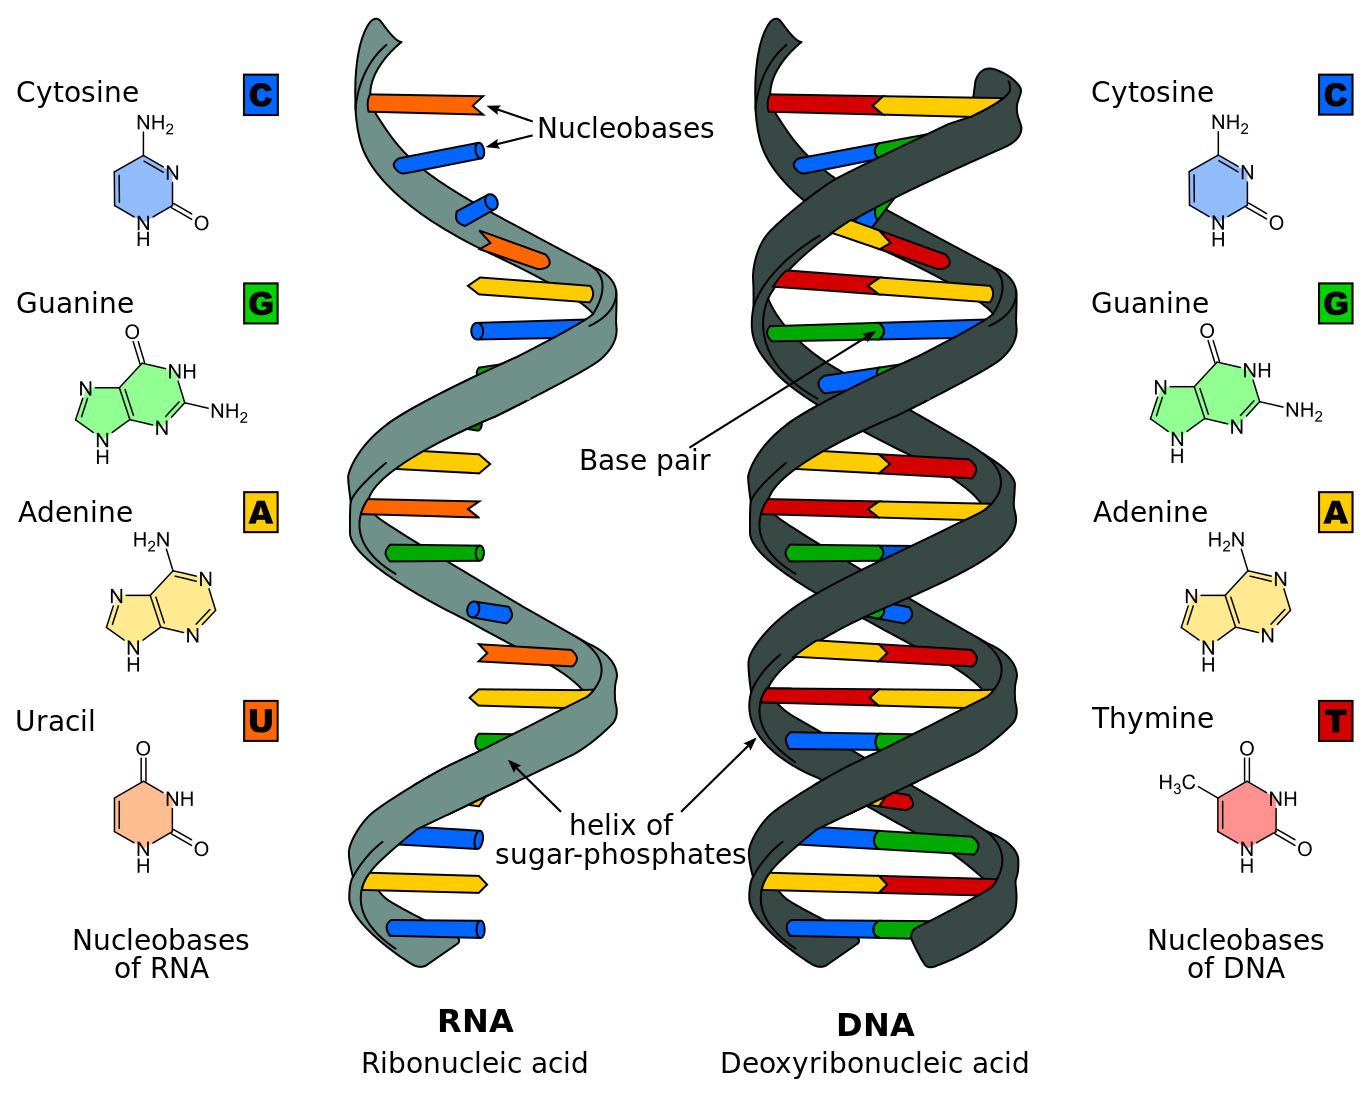 comparison of a single-stranded RNA and a double-stranded DNA